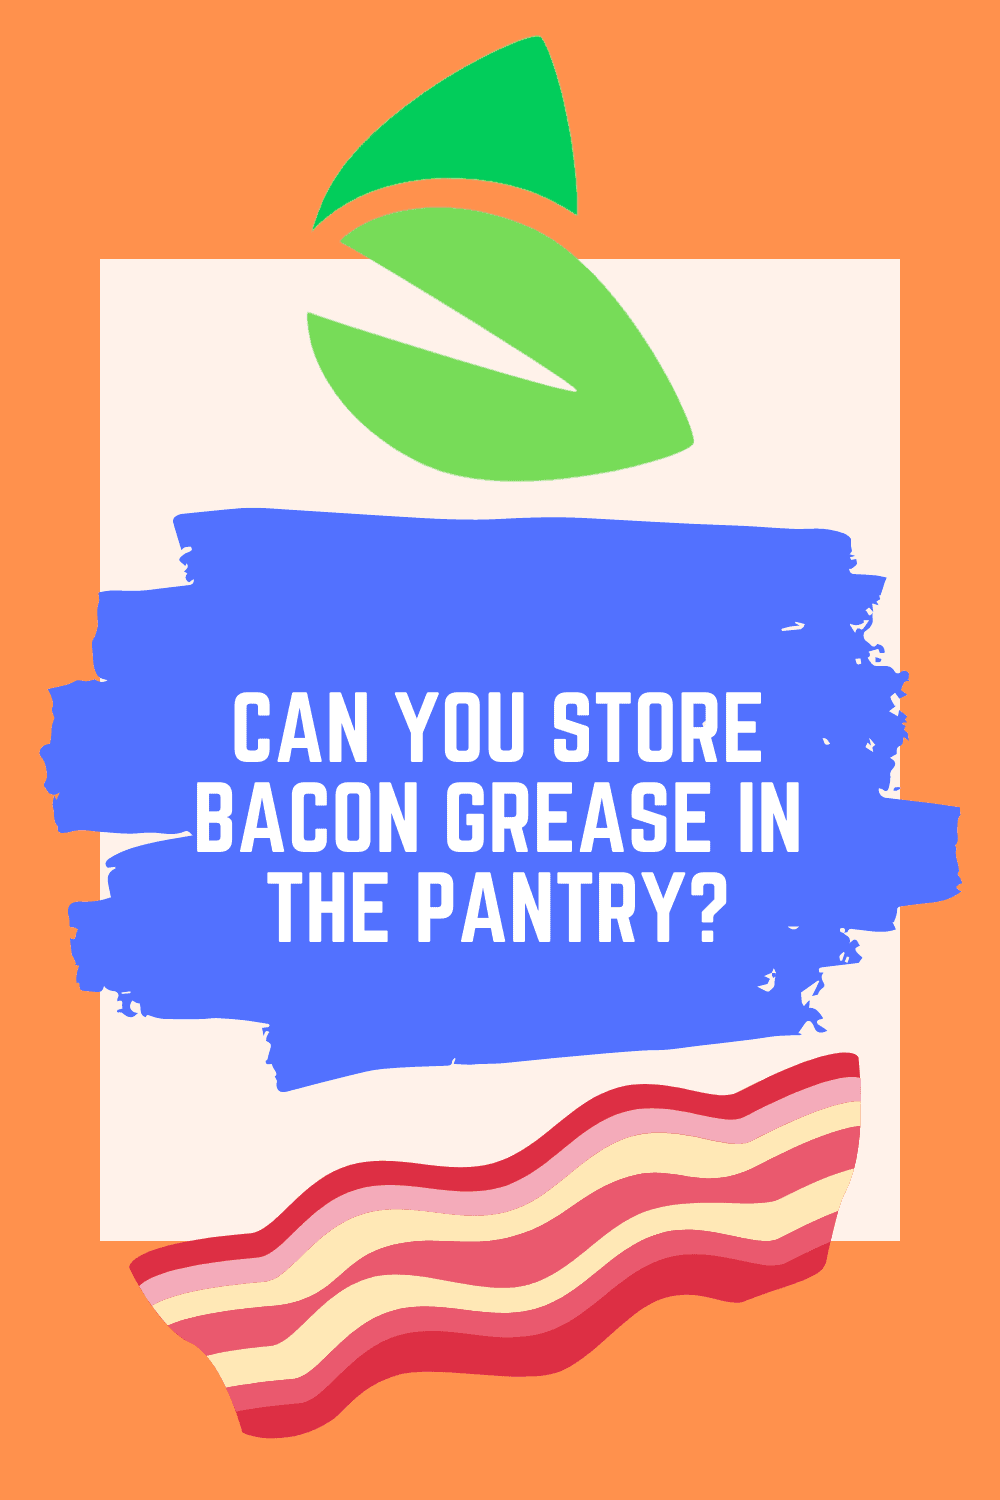 Can You Store Bacon Grease in the Pantry